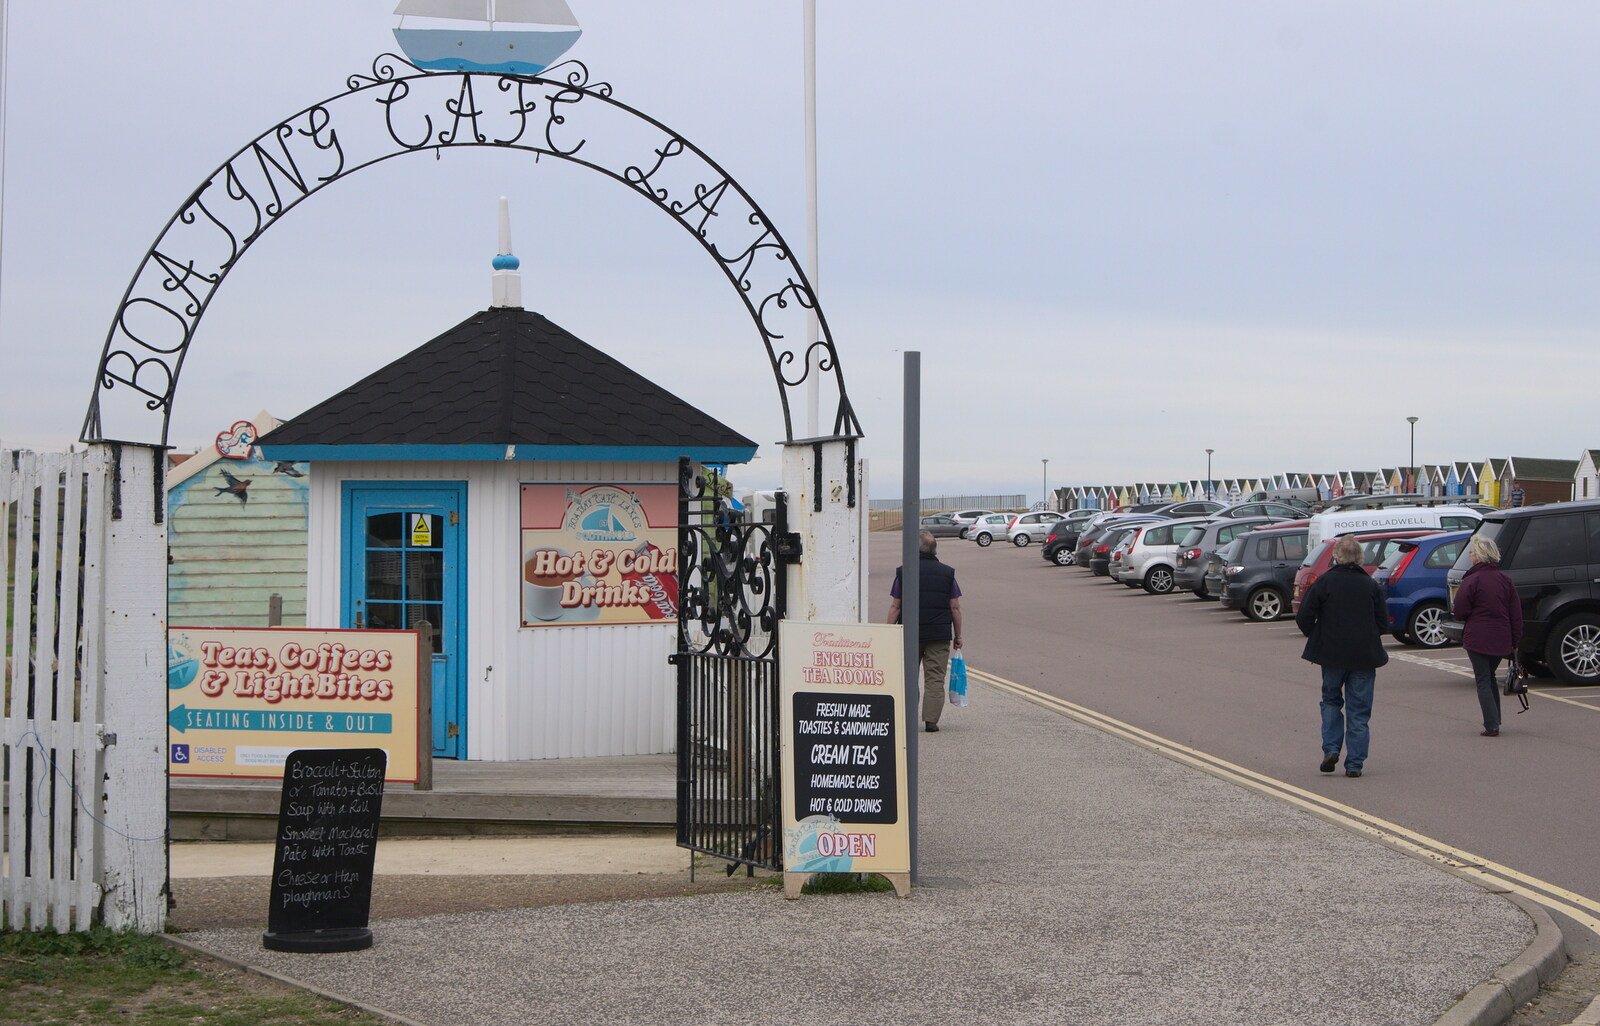 The Boating Café Lakes sign from On The Beach Again, Southwold, Suffolk - 12th October 2014